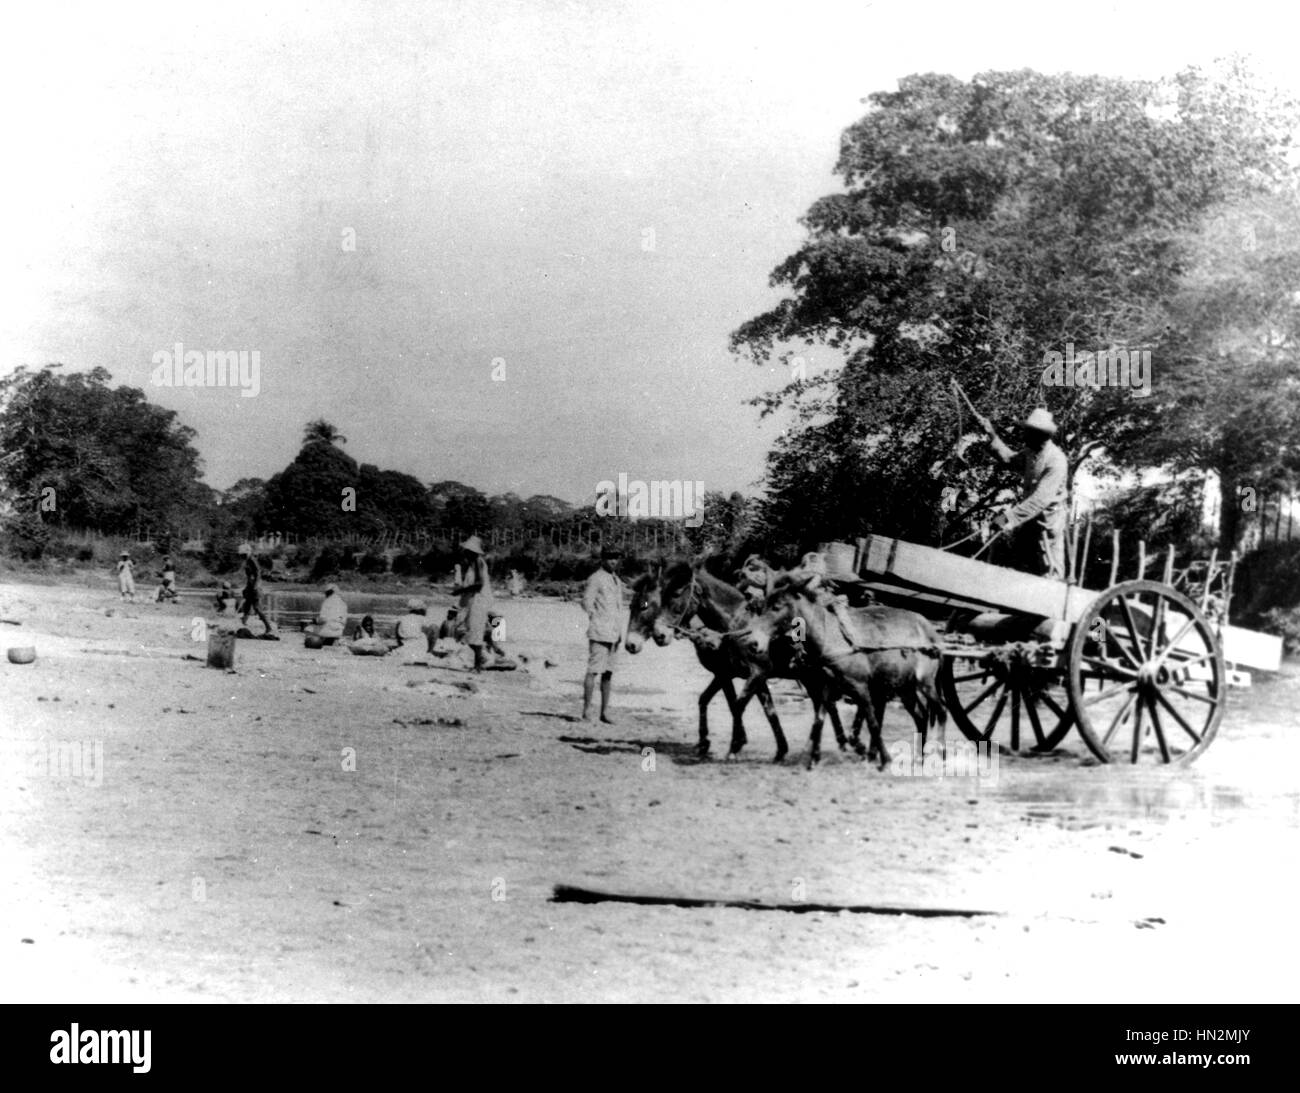 Marines using local inhabitants to build roads and bridges and to help with transportation 1916 Nicaragua Washington, D.C. National archives Stock Photo